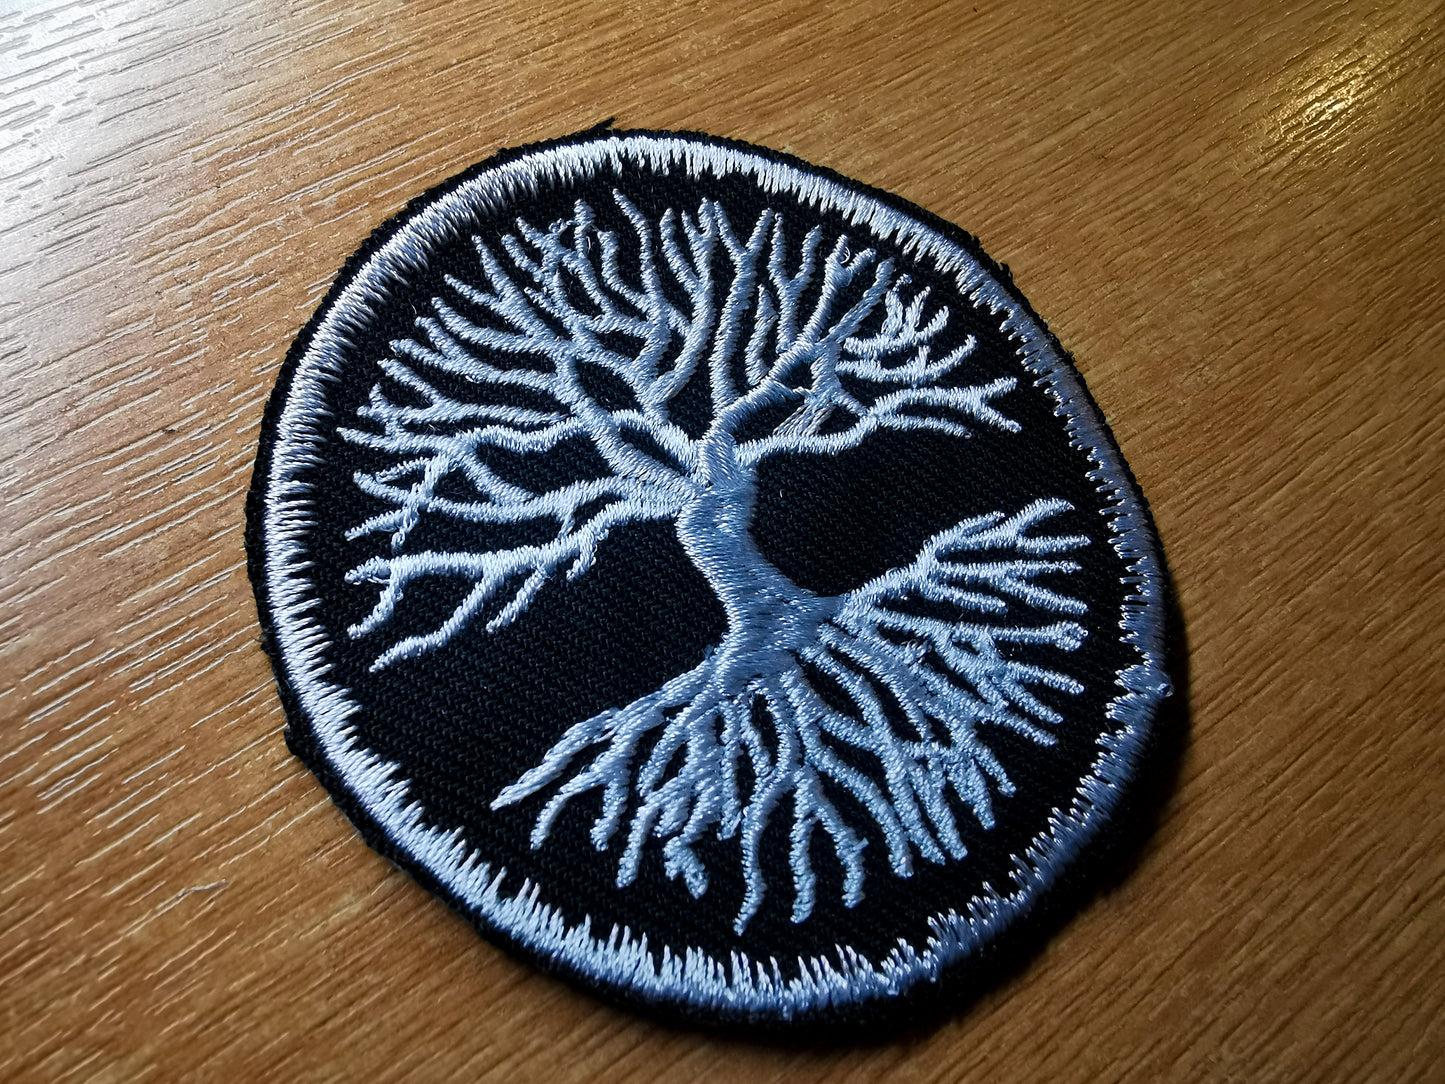 Yggdrasil Tree of Life Embroidered Patch White and Snowy Border